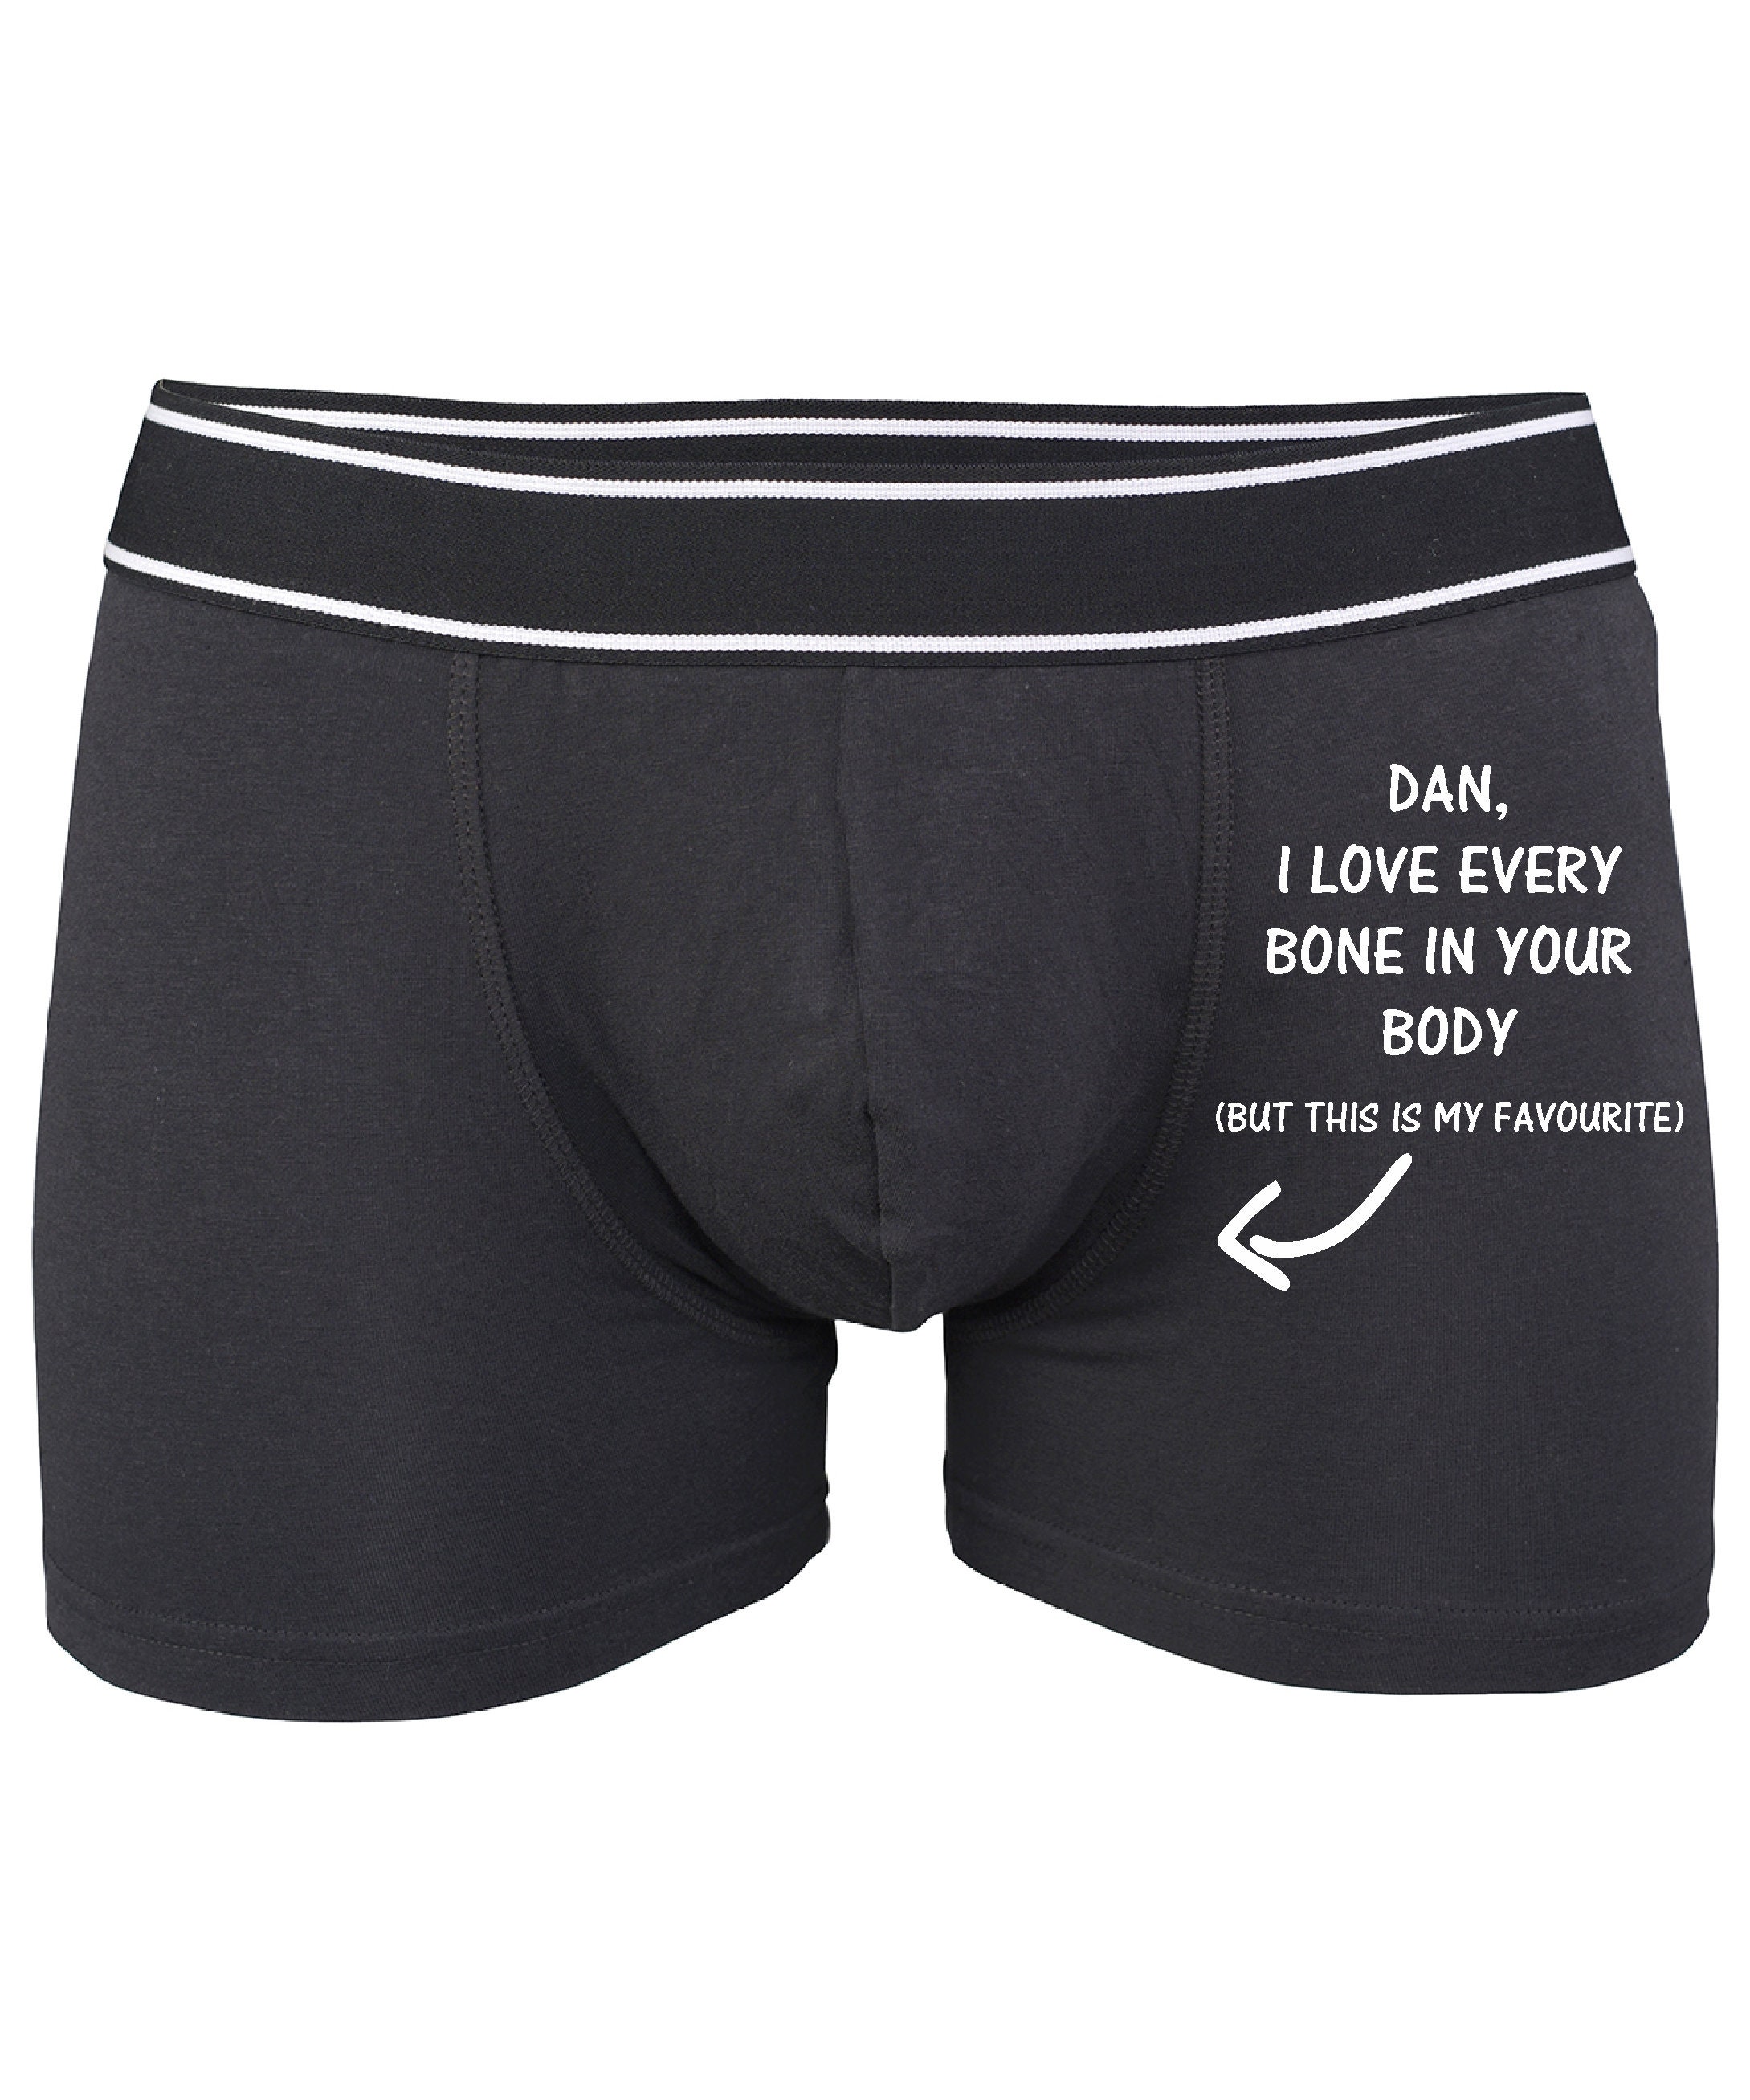 Personalised Boxer Shorts, Funny Boxers for Men, Valentines Day